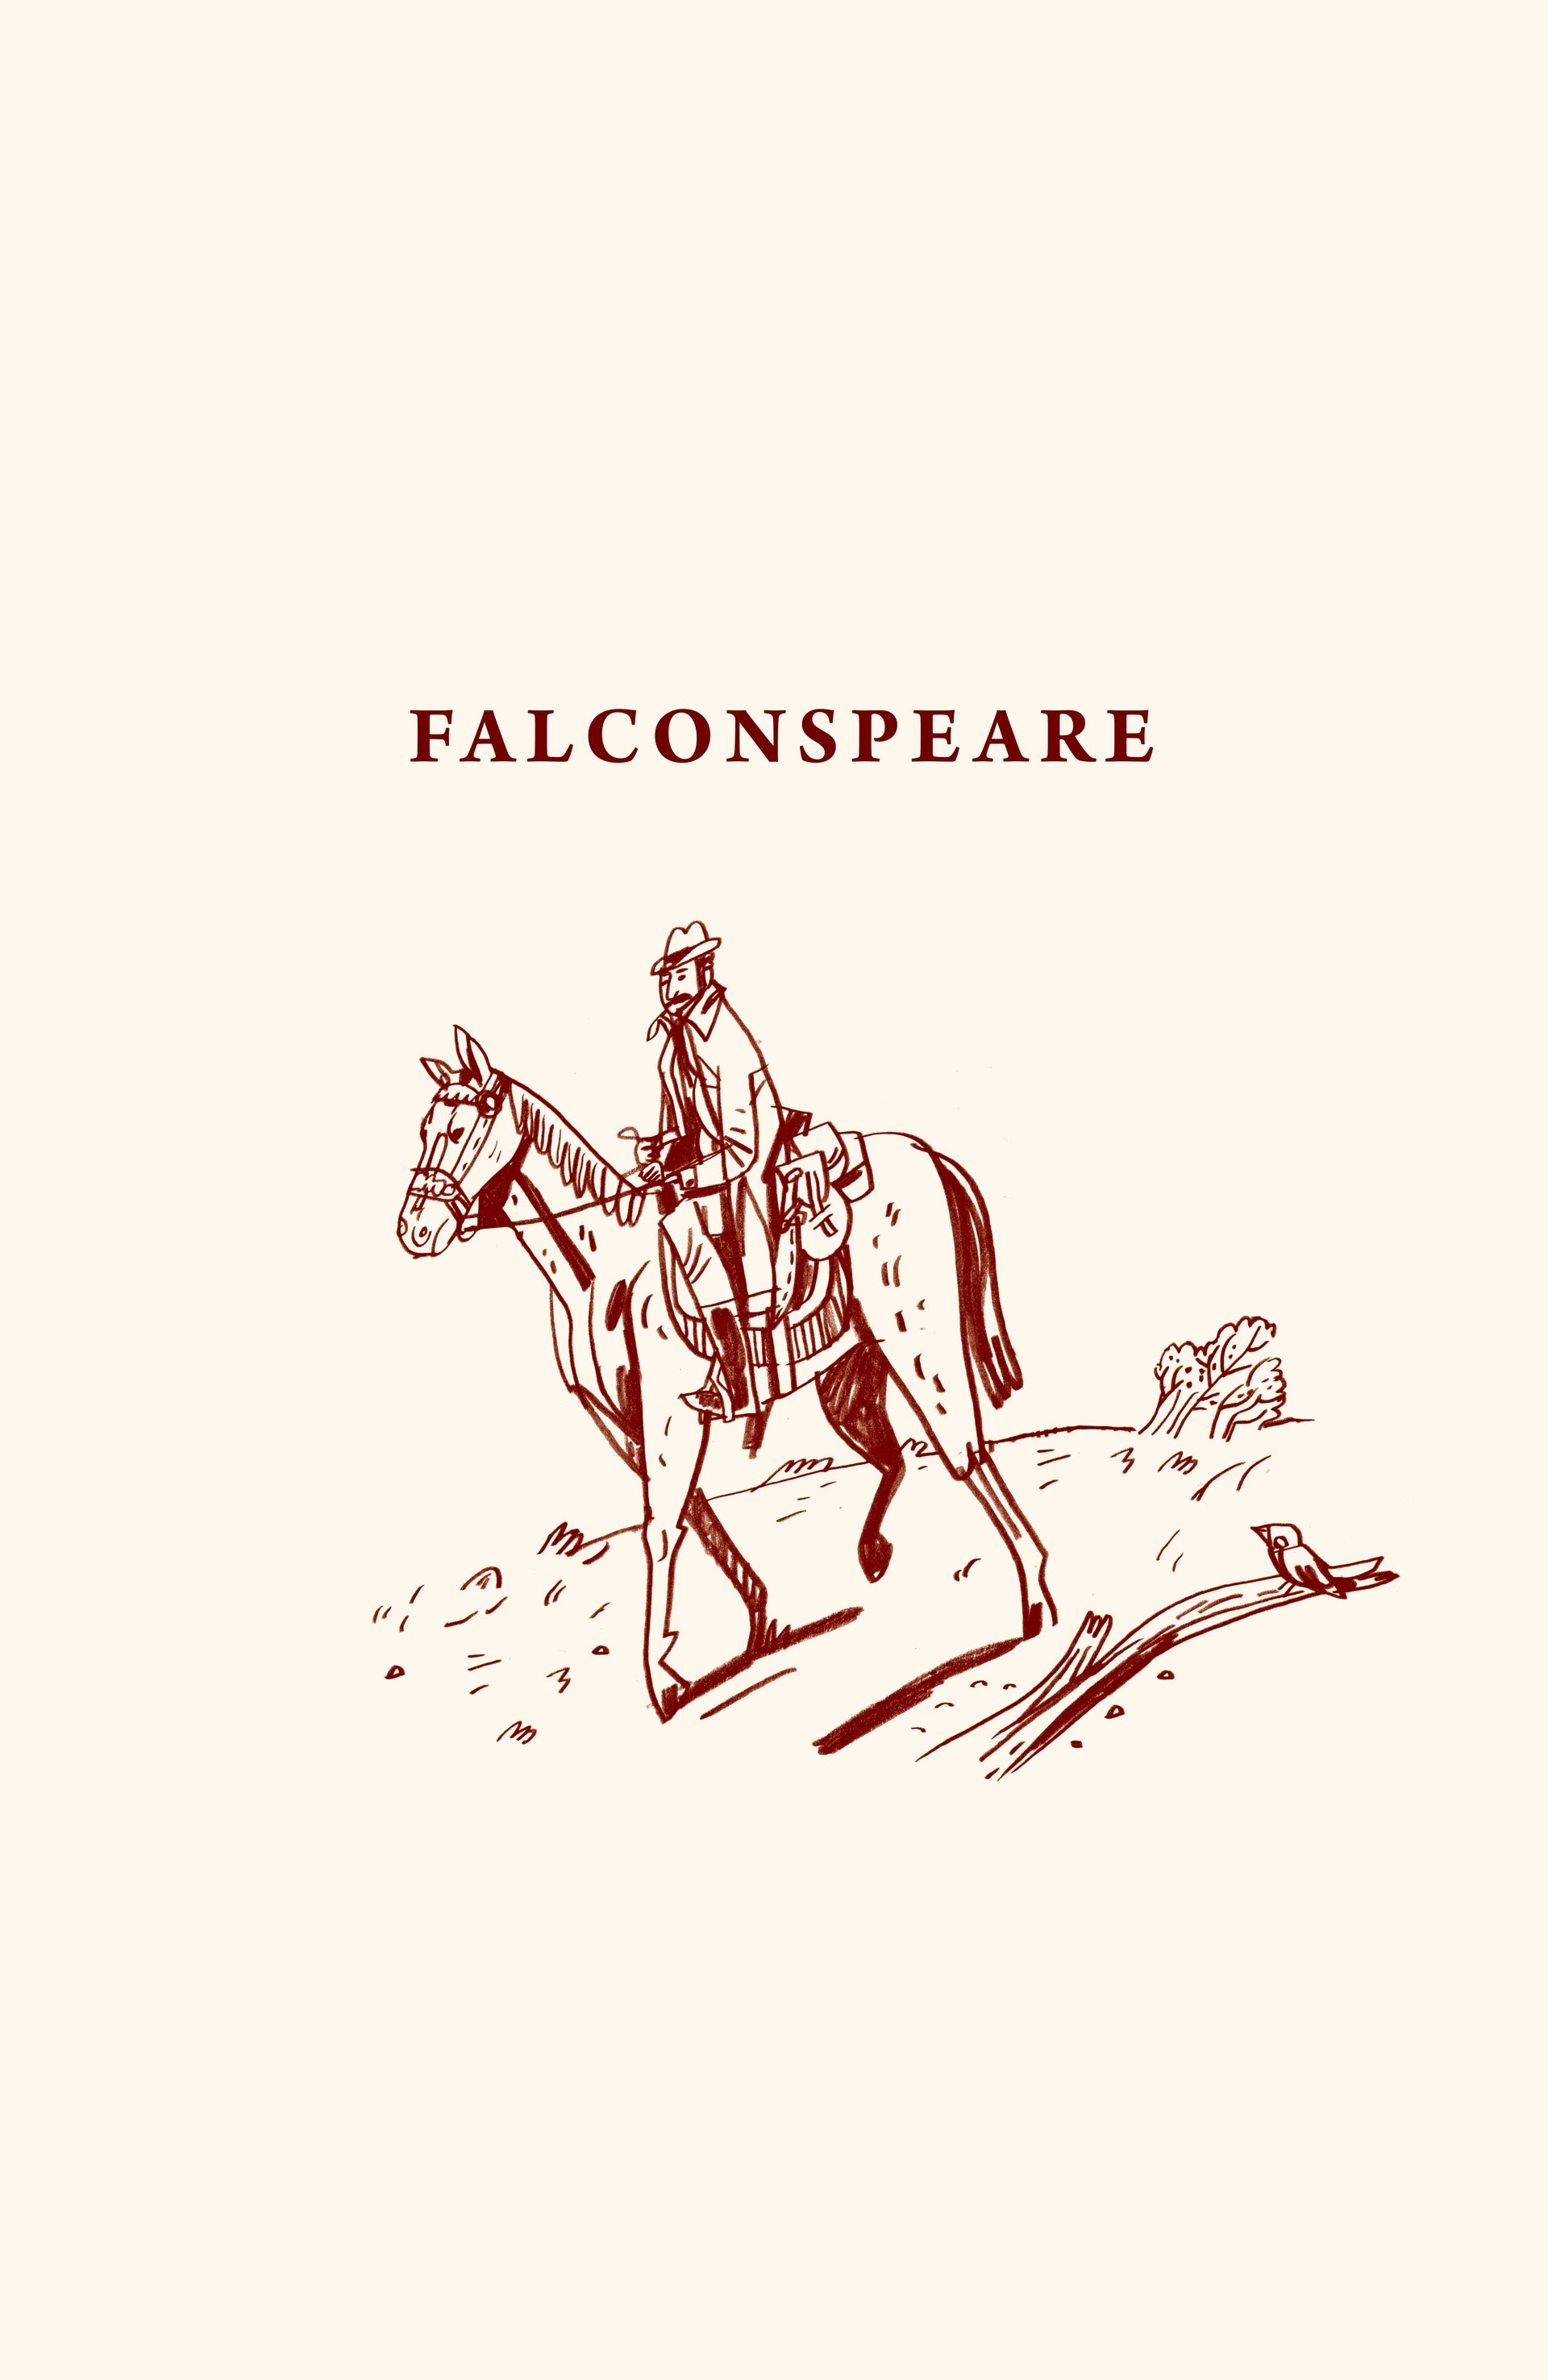 Read online Falconspeare comic -  Issue # Full - 4